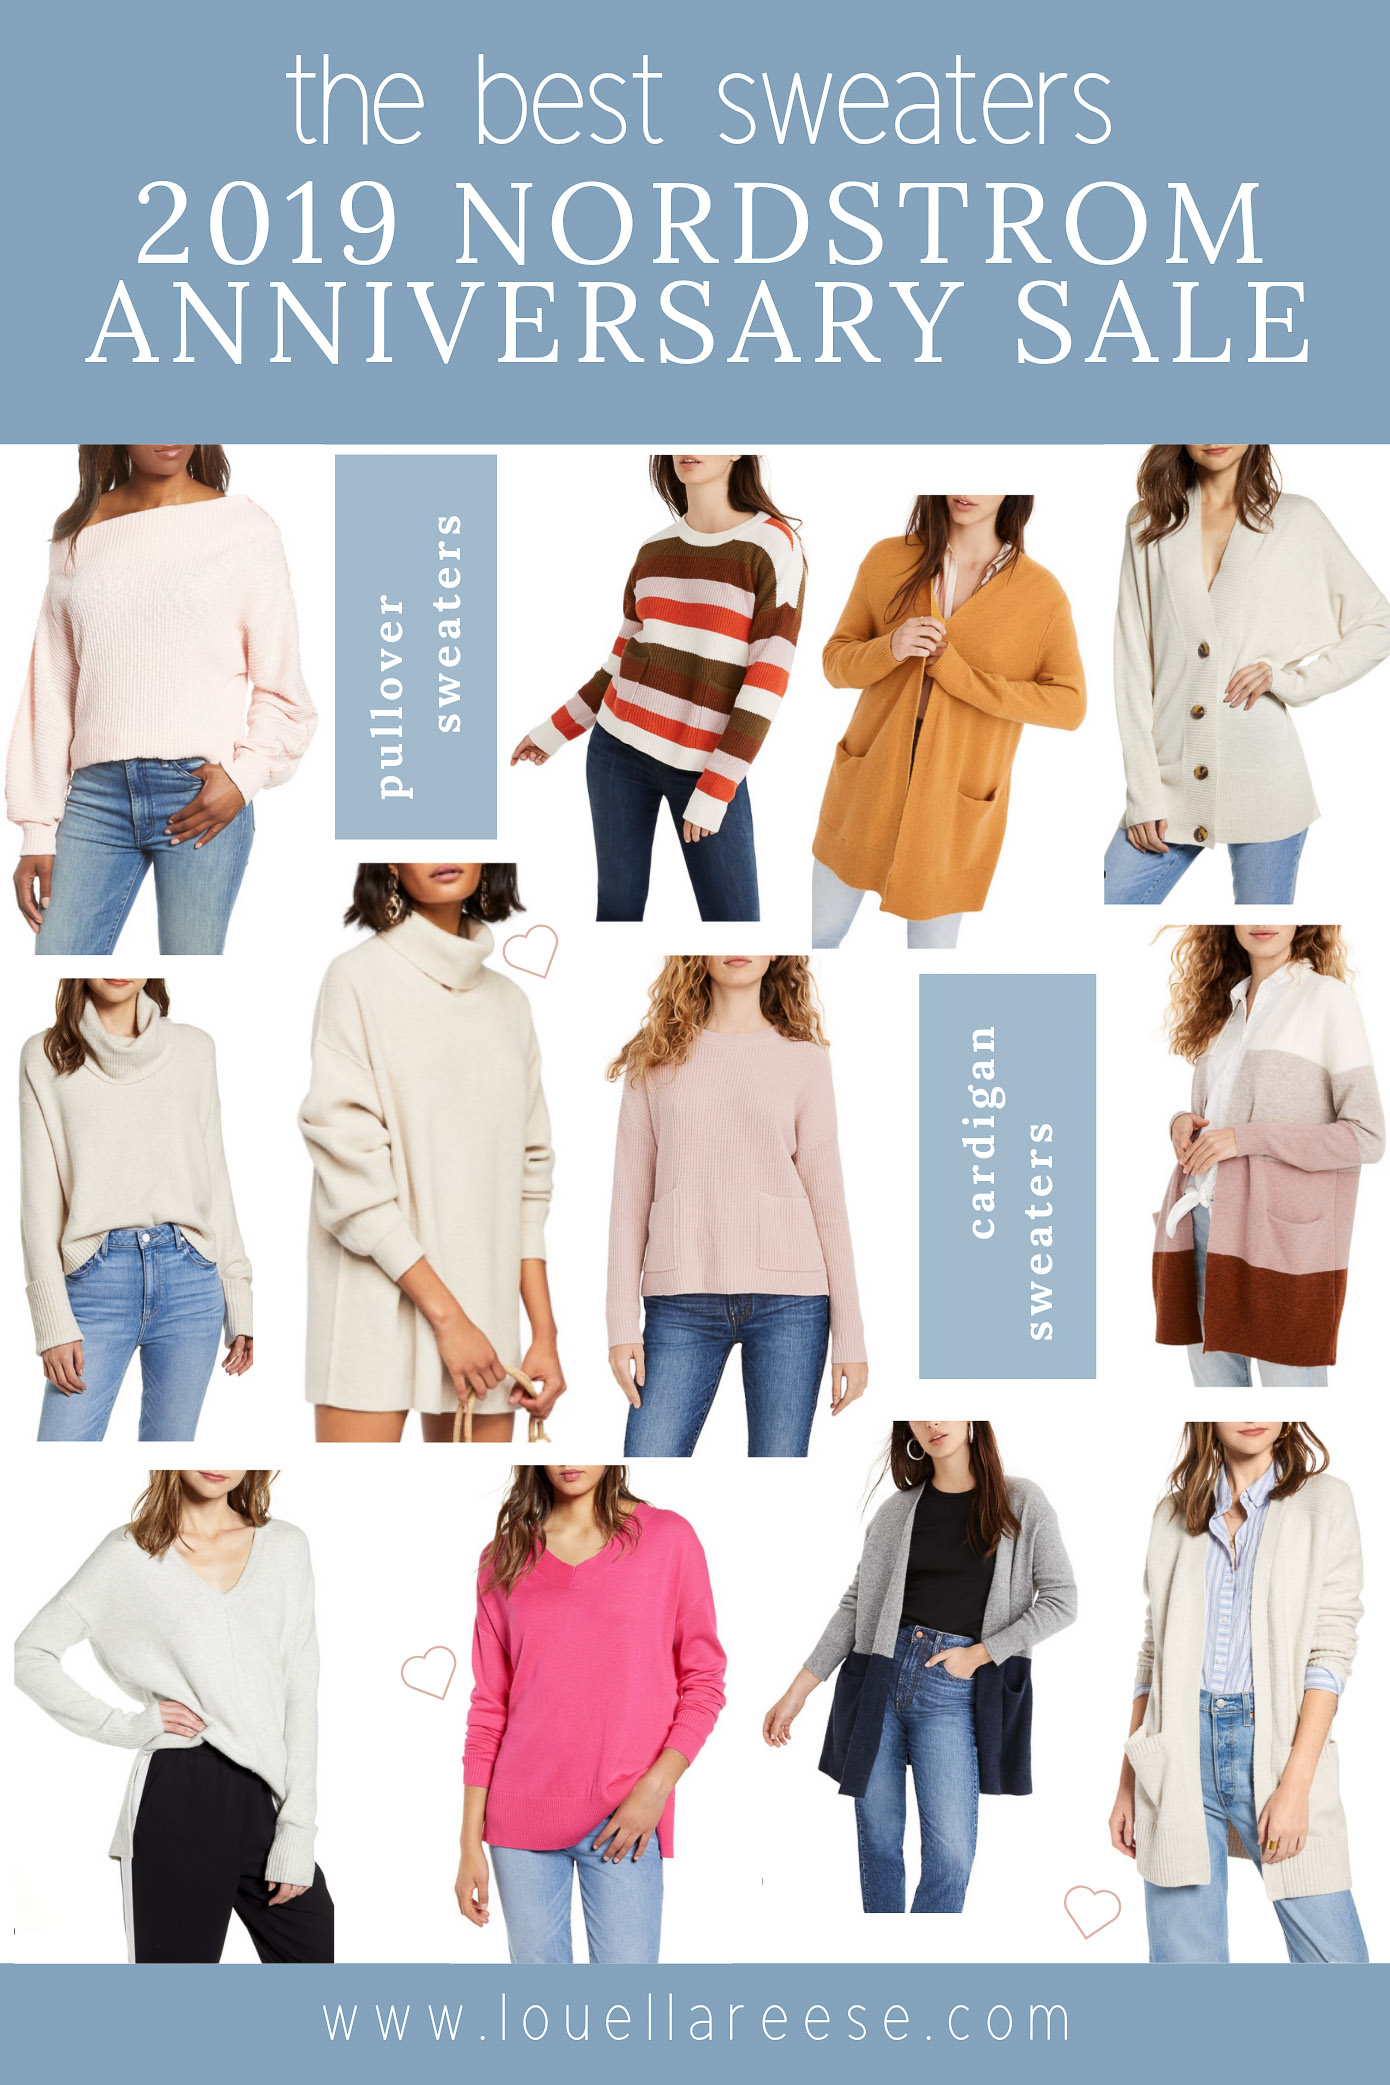 2019 Nordstrom Anniversary Sale Best Sweaters | The BEST Sweaters from the 2019 Nordstrom Anniversary Sale | Louella Reese